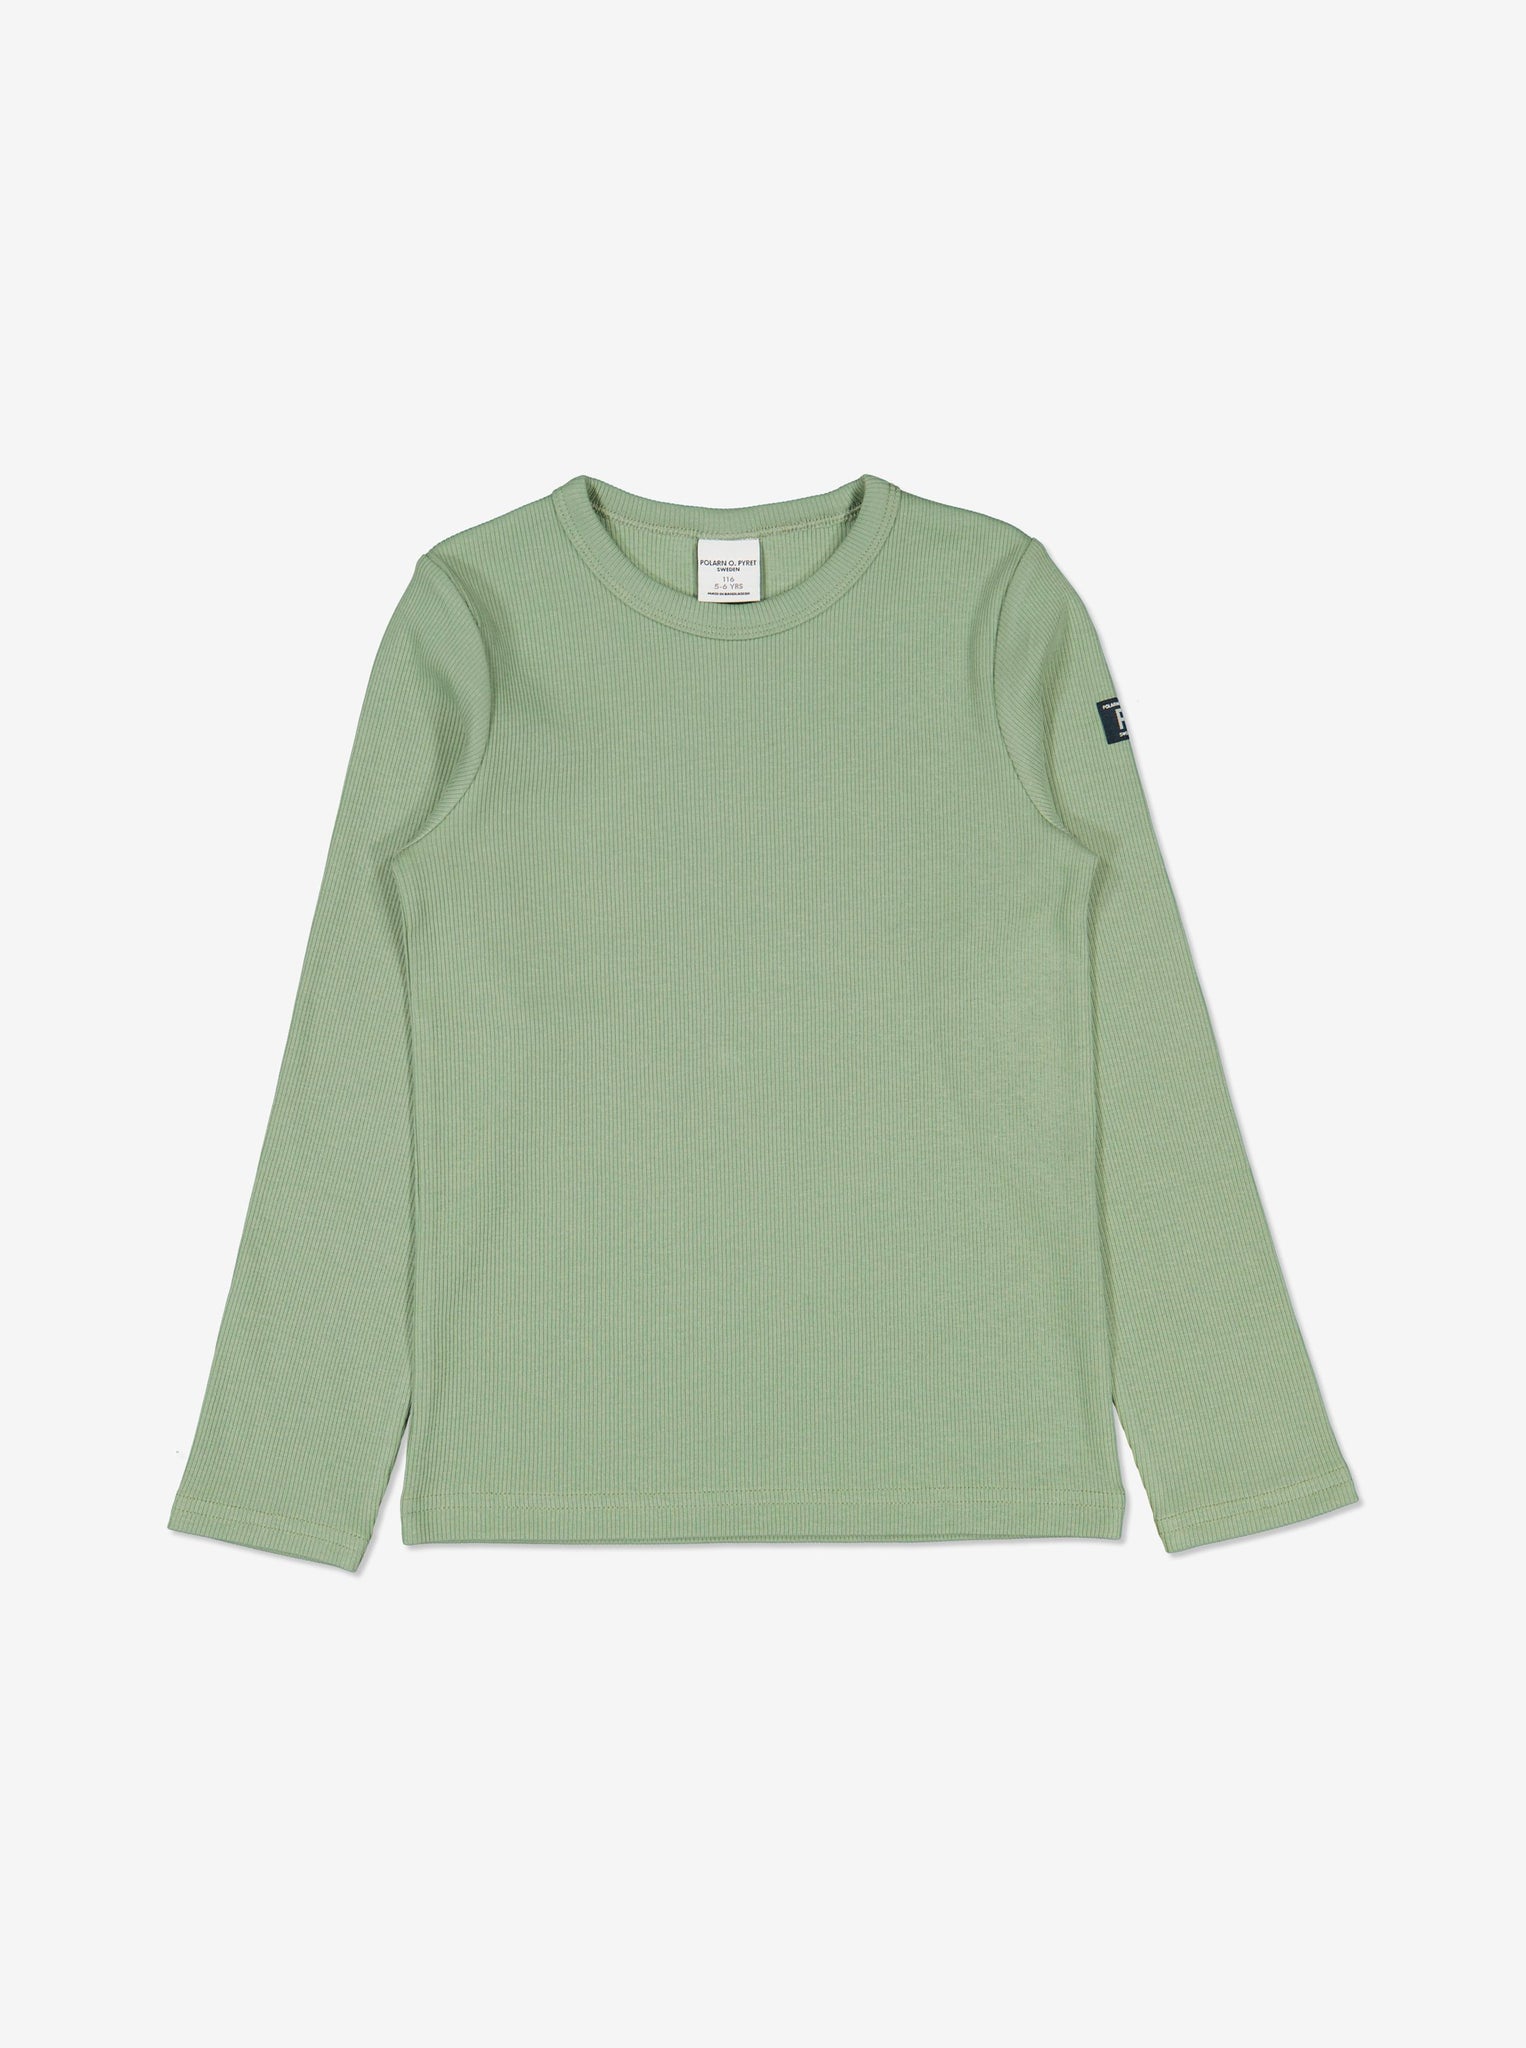  Organic Green Kids Top from Polarn O. Pyret Kidswear. Made from environmentally friendly materials.